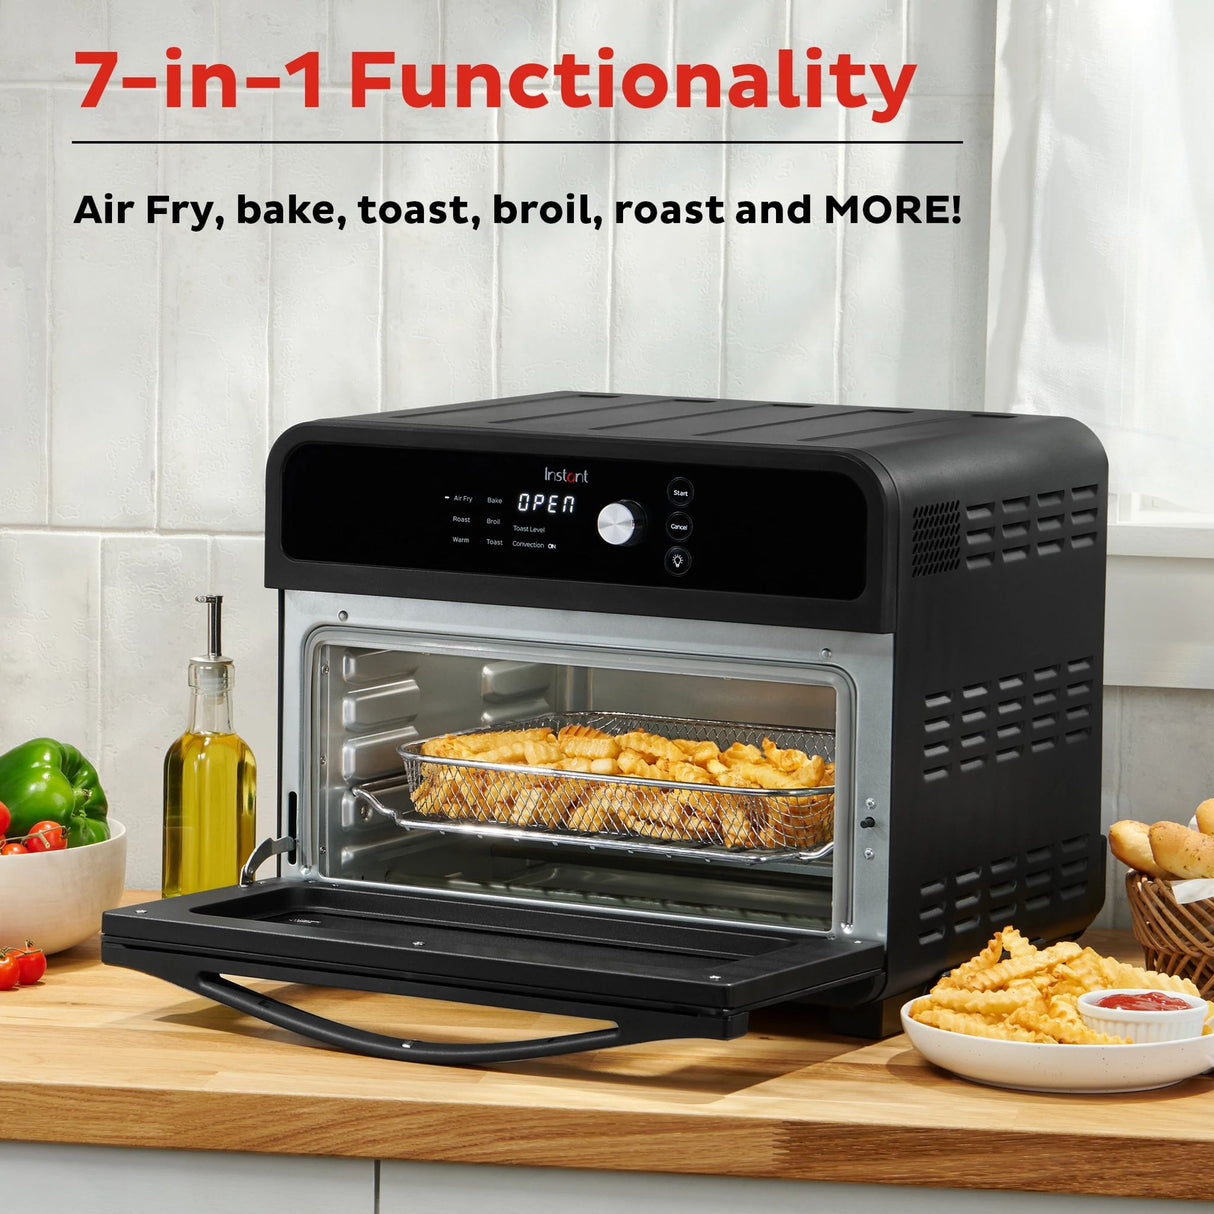  Instant Omni™ Pro 18L Toaster Oven with text 7 in 1 Functionality